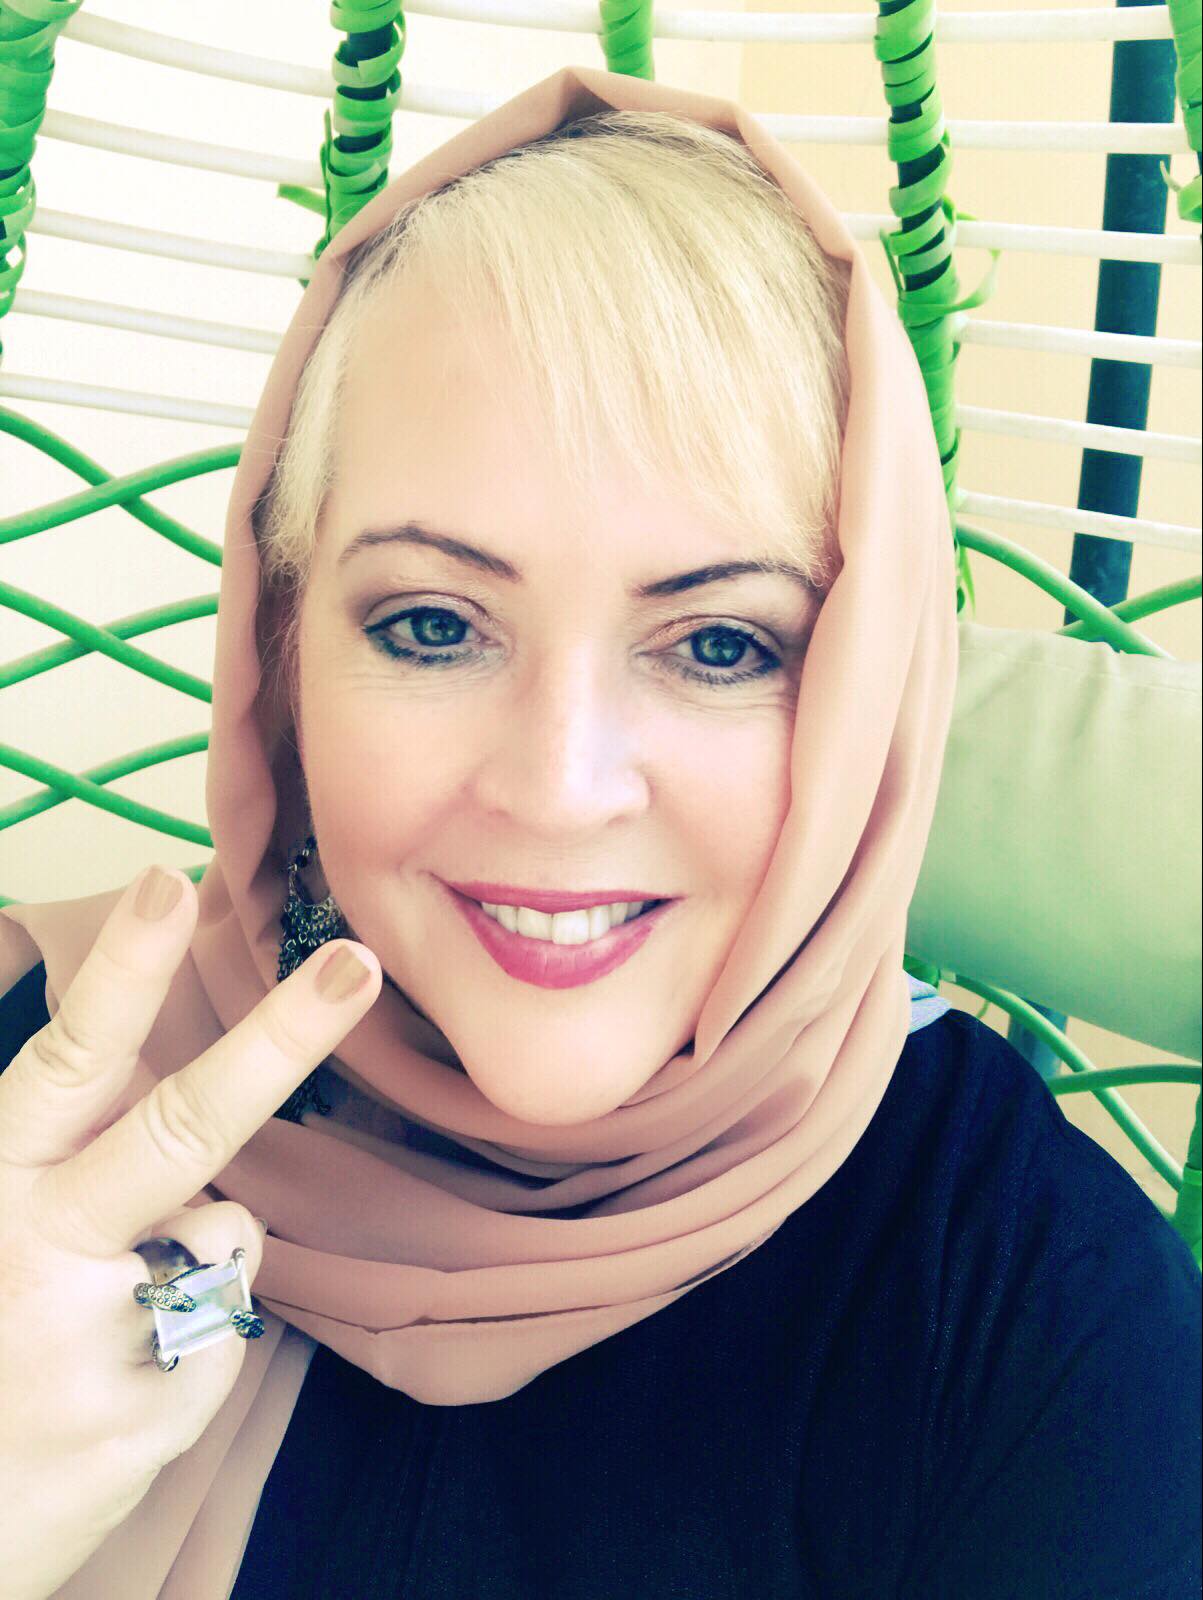 Dedra L. Stevenson, Author Award Winning Screenwriter, Producer and Global Tolerance Face from Sharjah in UAE 01